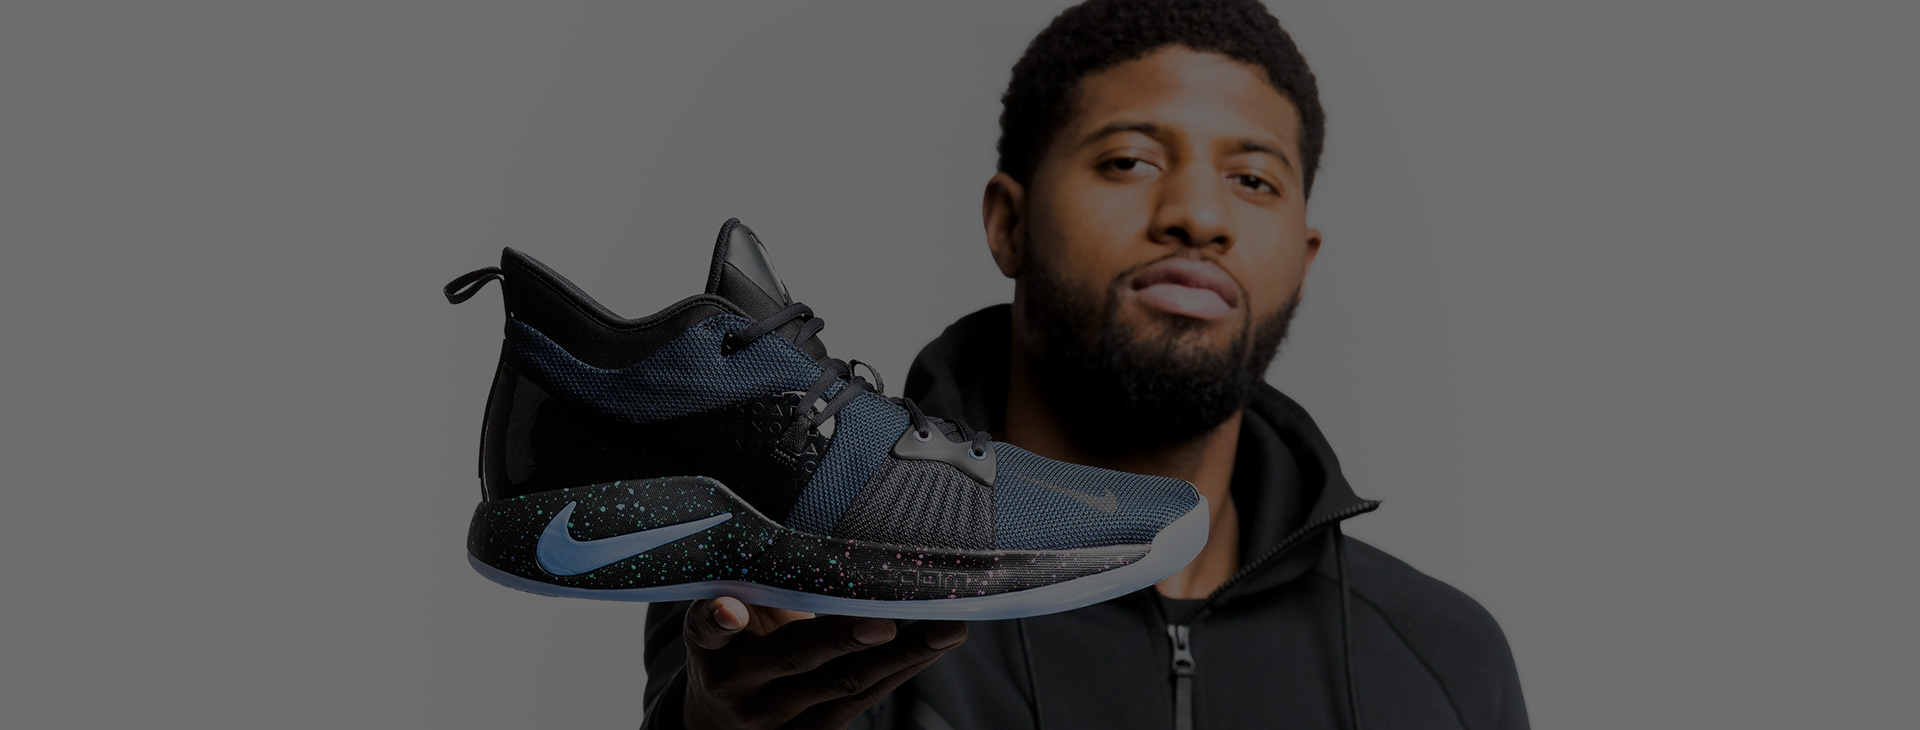 pg 2 with strap